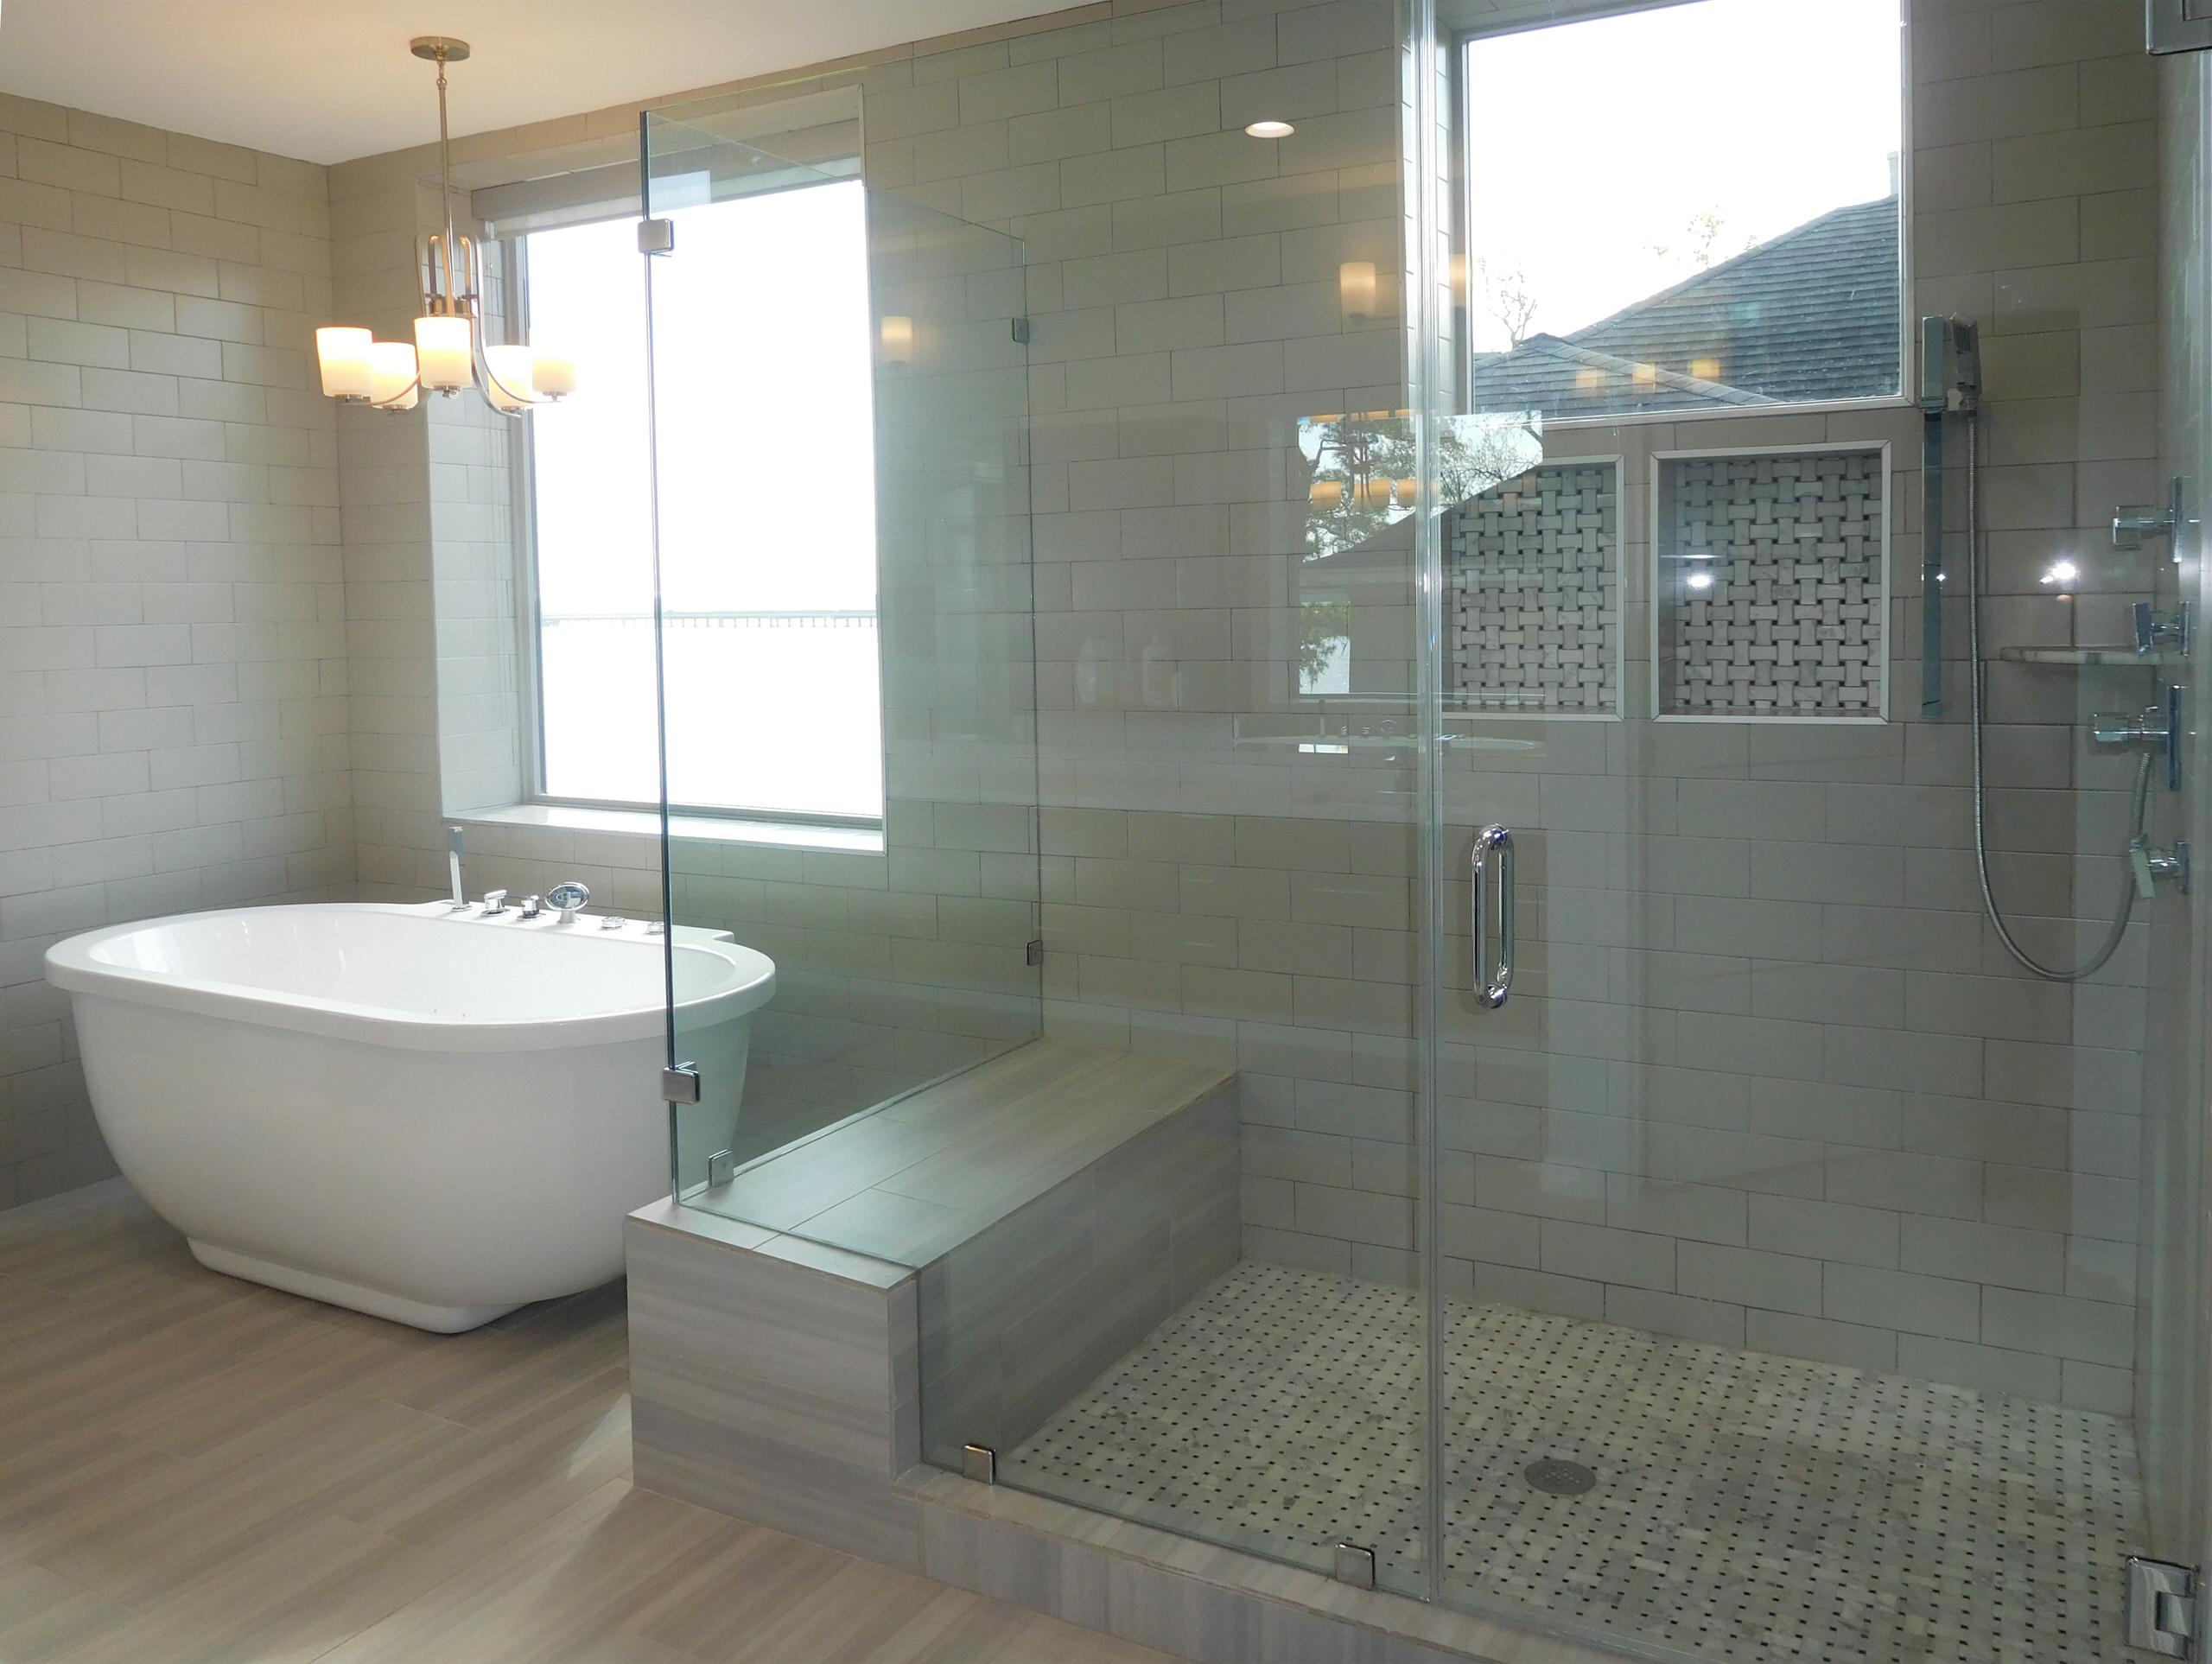 Freestanding tub with separate shower